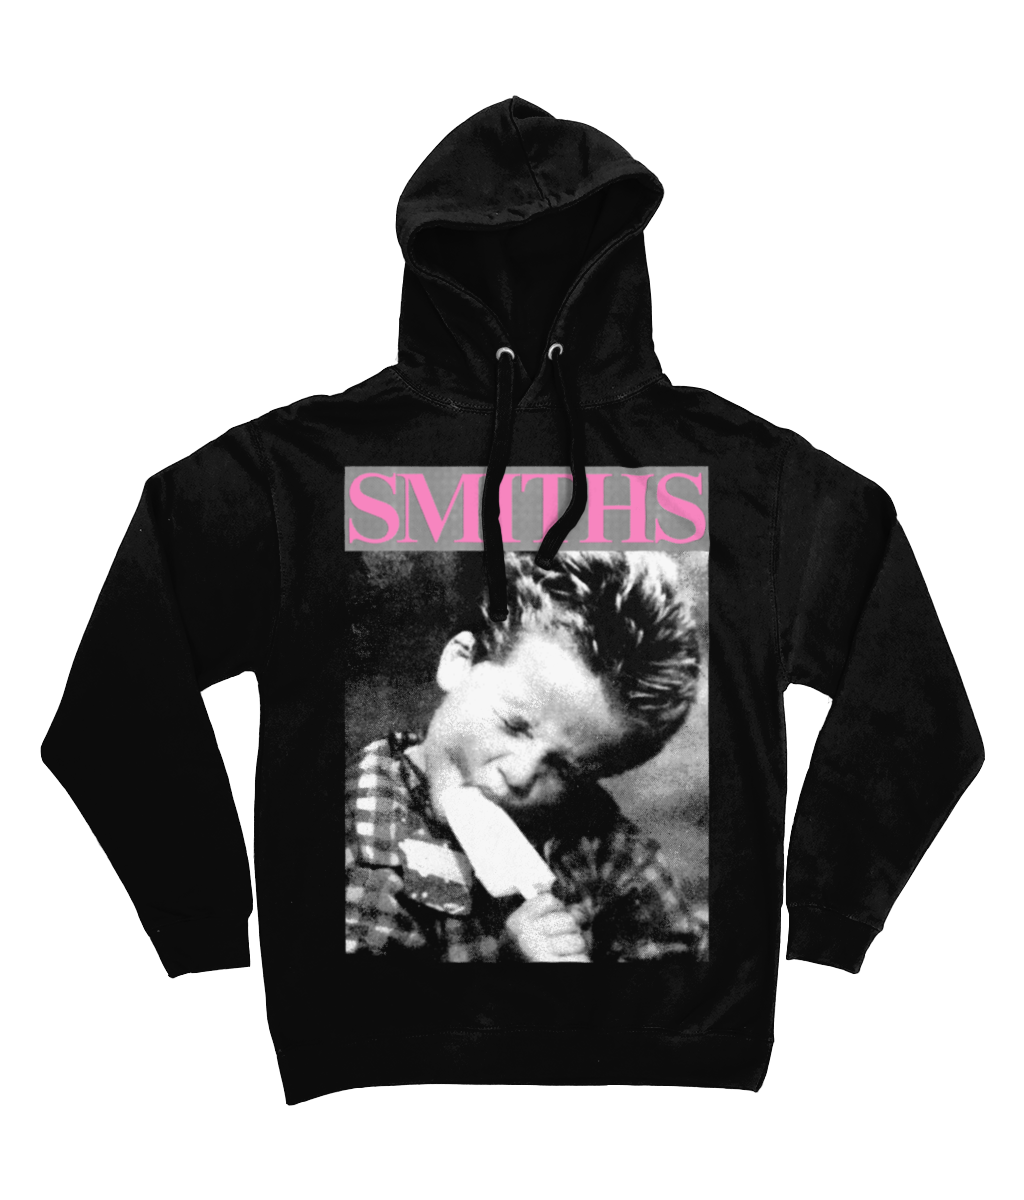 THE SMITHS - 'Boy With Lolly' - 1986 - Pink & Black - Hoodie